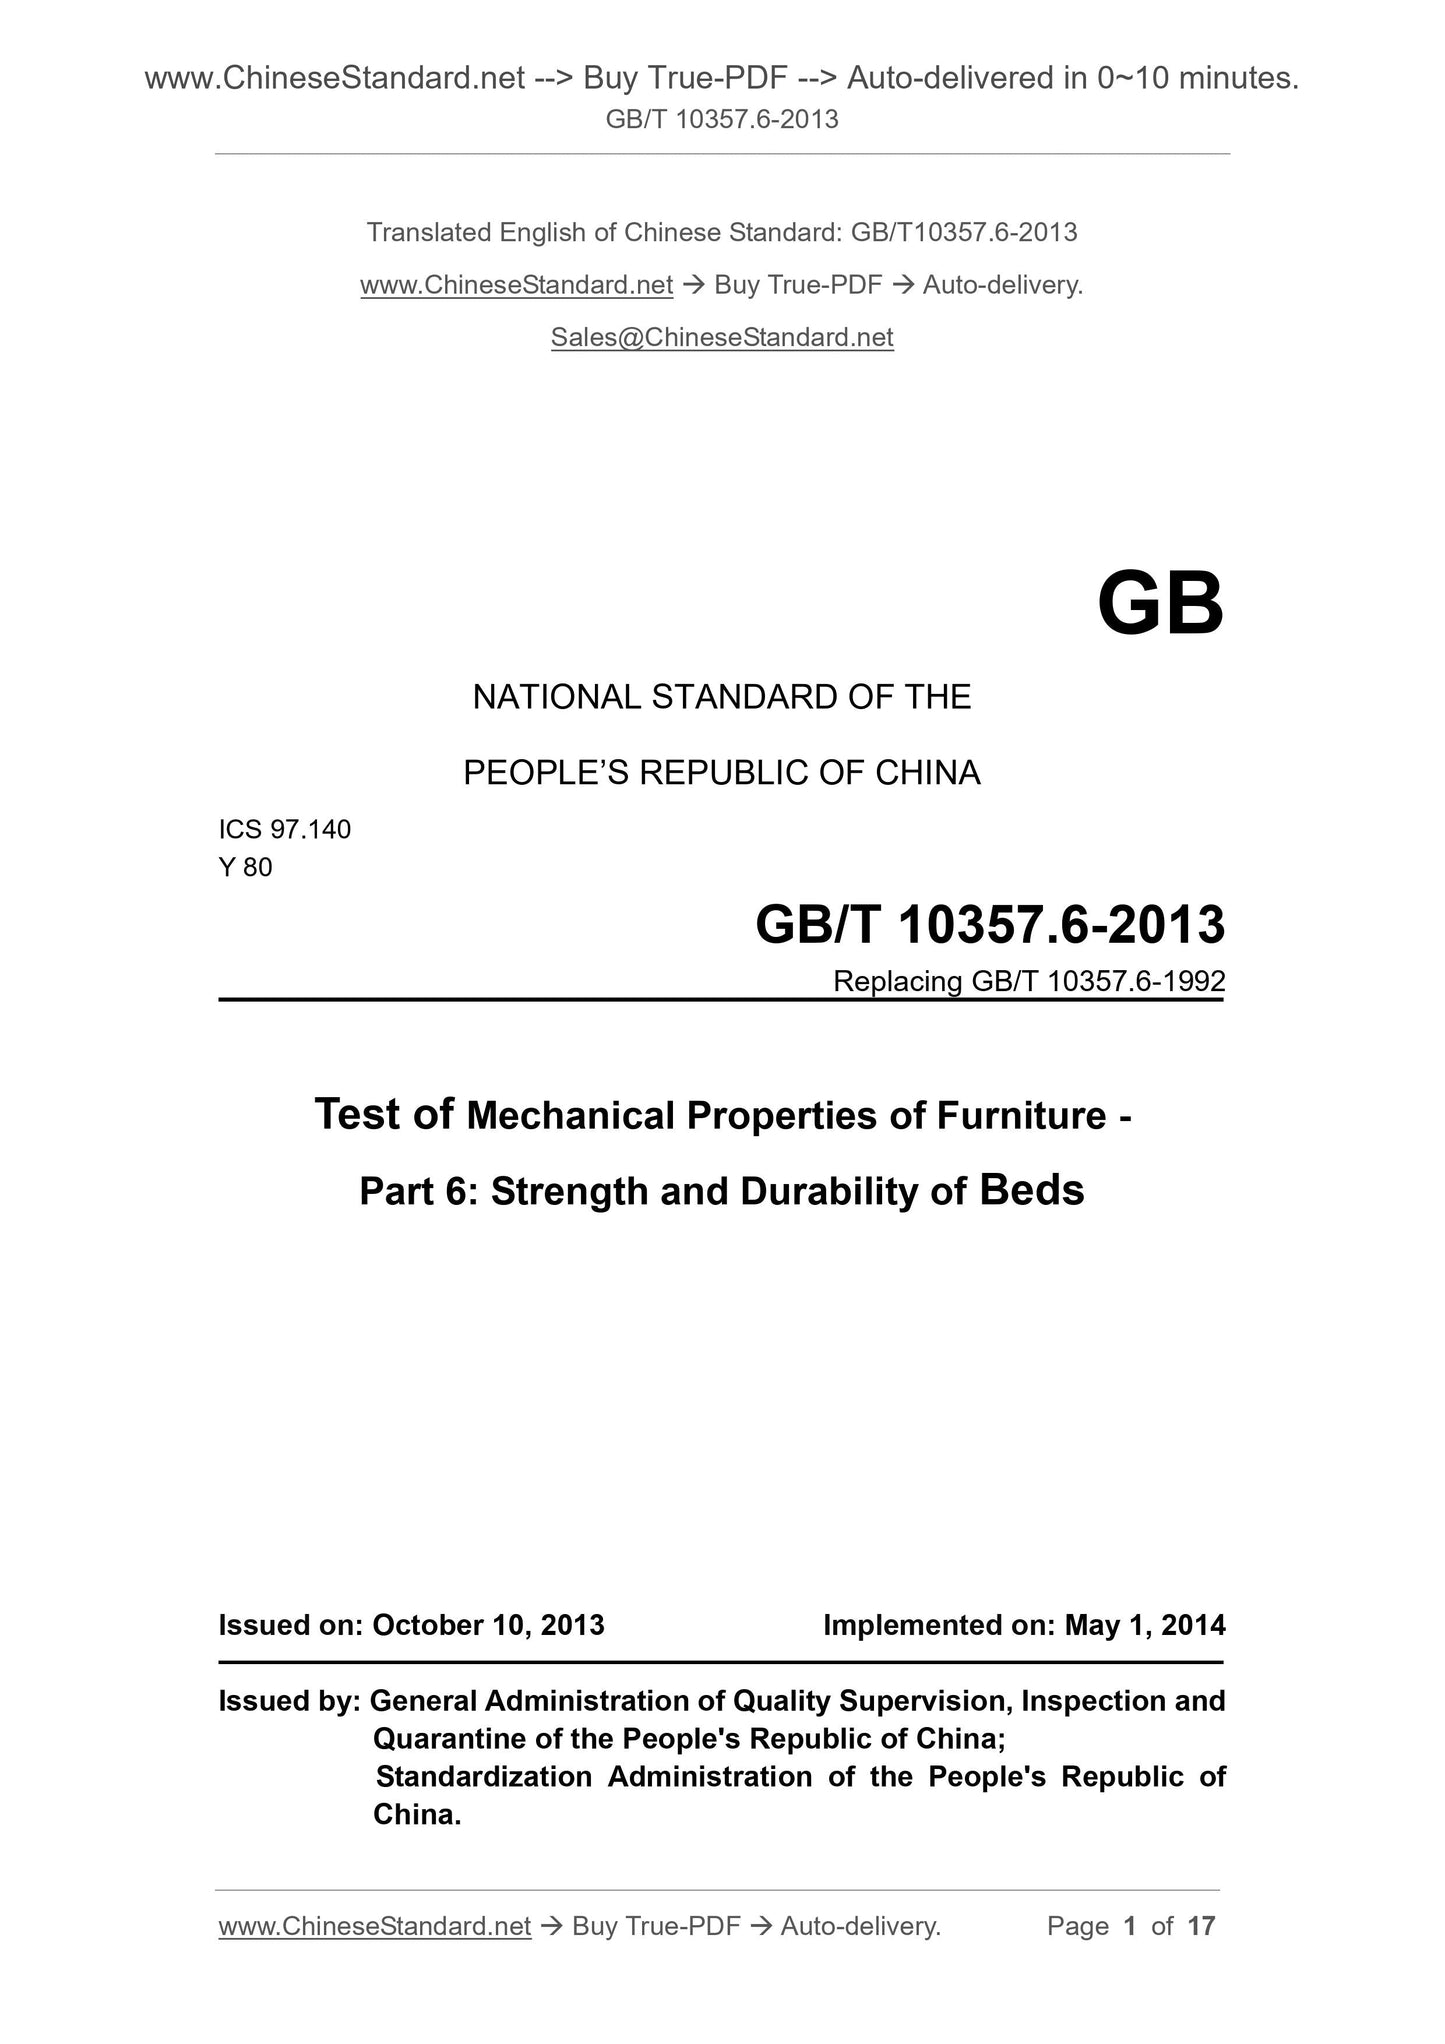 GB/T 10357.6-2013 Page 1